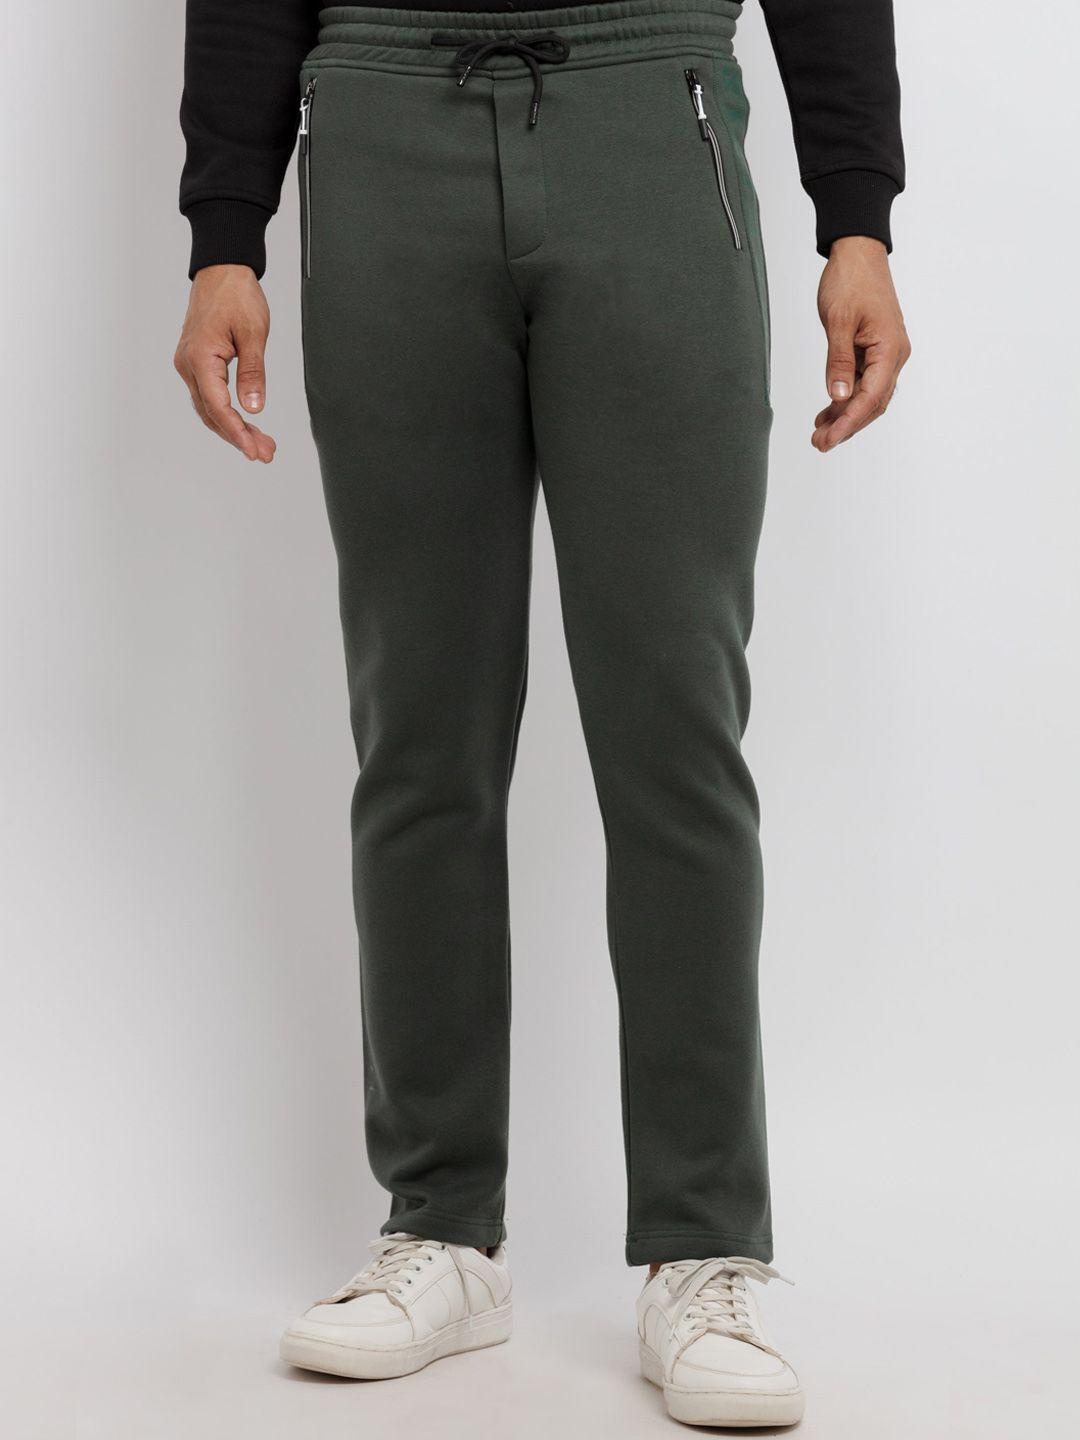 status quo men olive green printed cotton trackpants